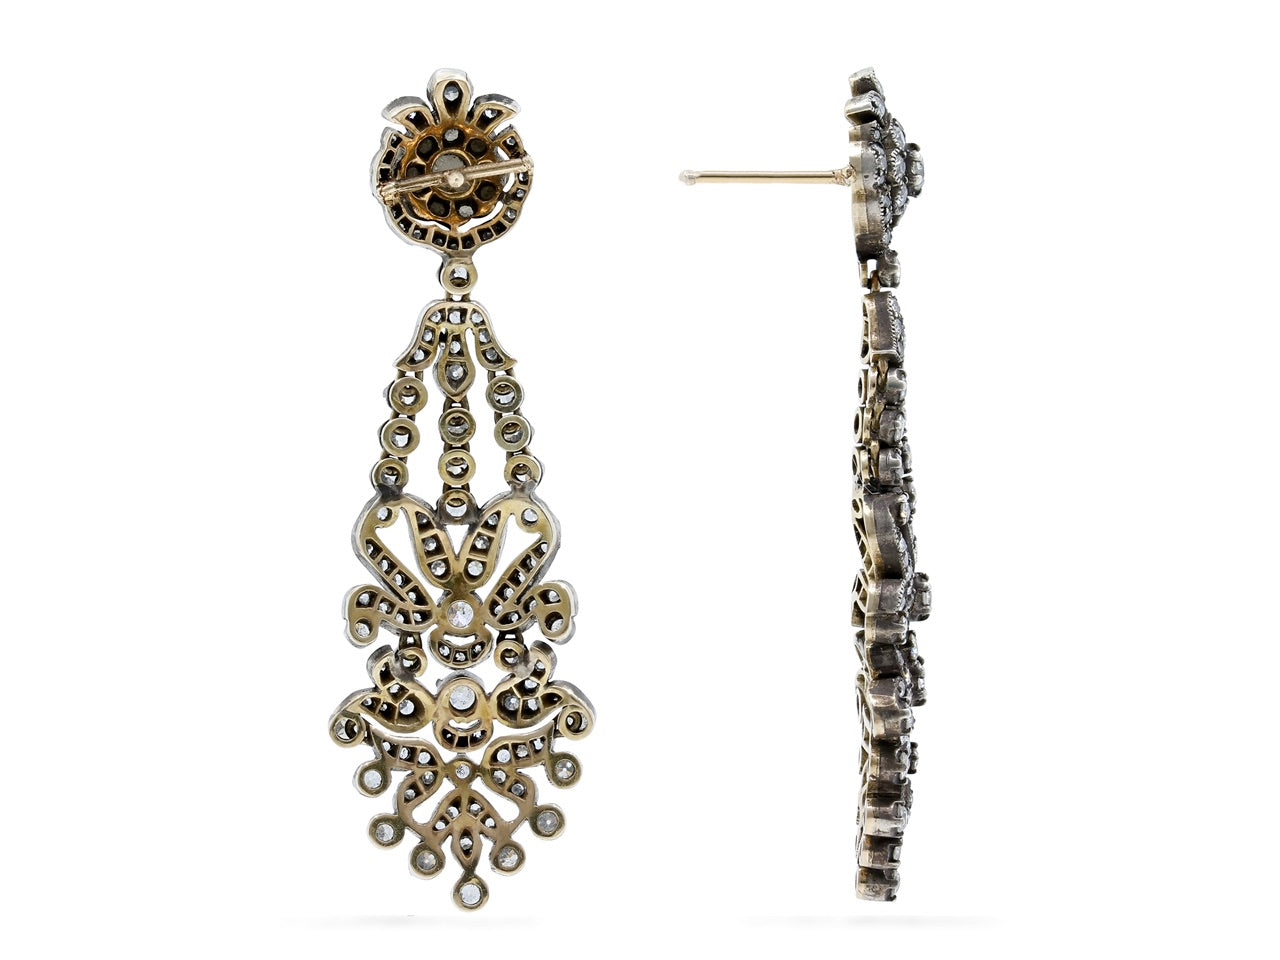 Antique-Style Diamond Chandelier Earrings in Silver over Gold